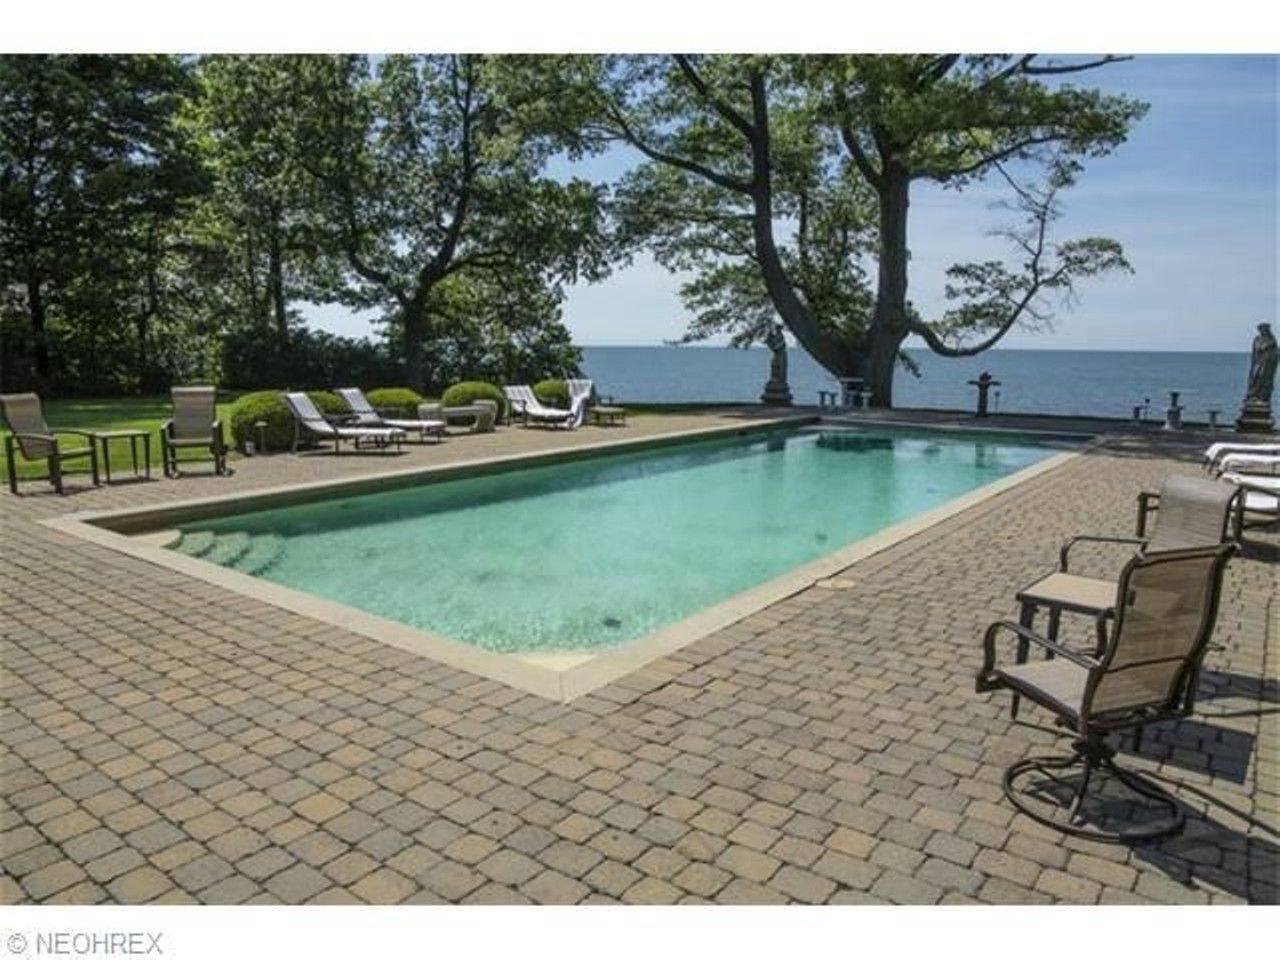 This palatial lakefront abode has a private outdoor pool (and an indoor one as well).